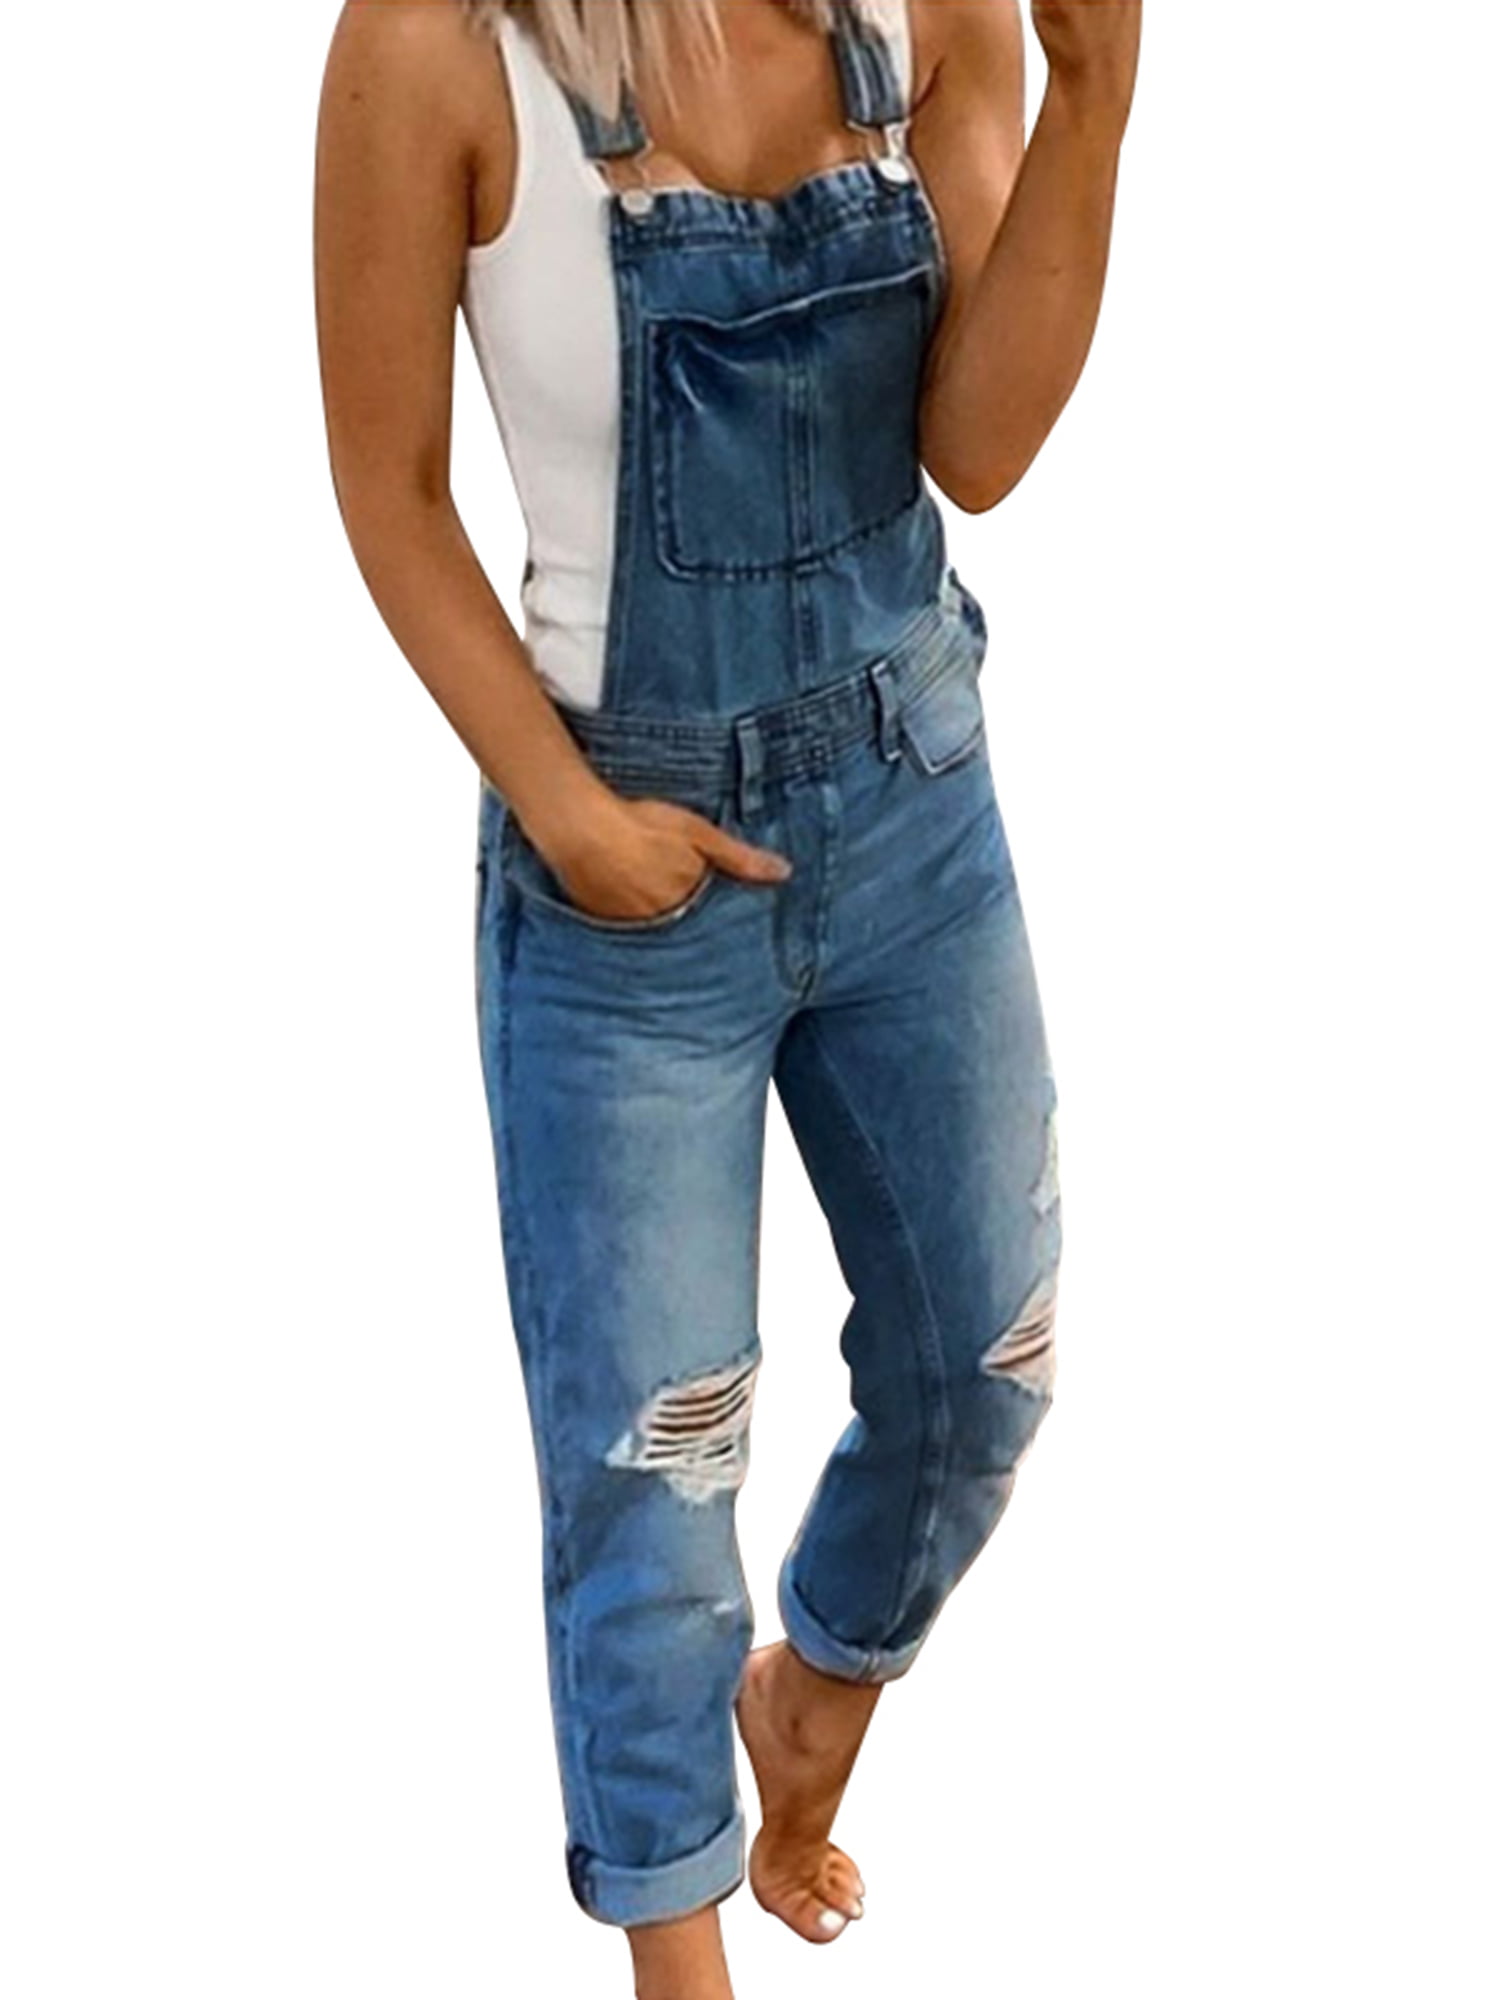 Stylo Womens Cotton Denim Dungarees Long Ripped Knee Wash Jeans Jumpsuit Full Length